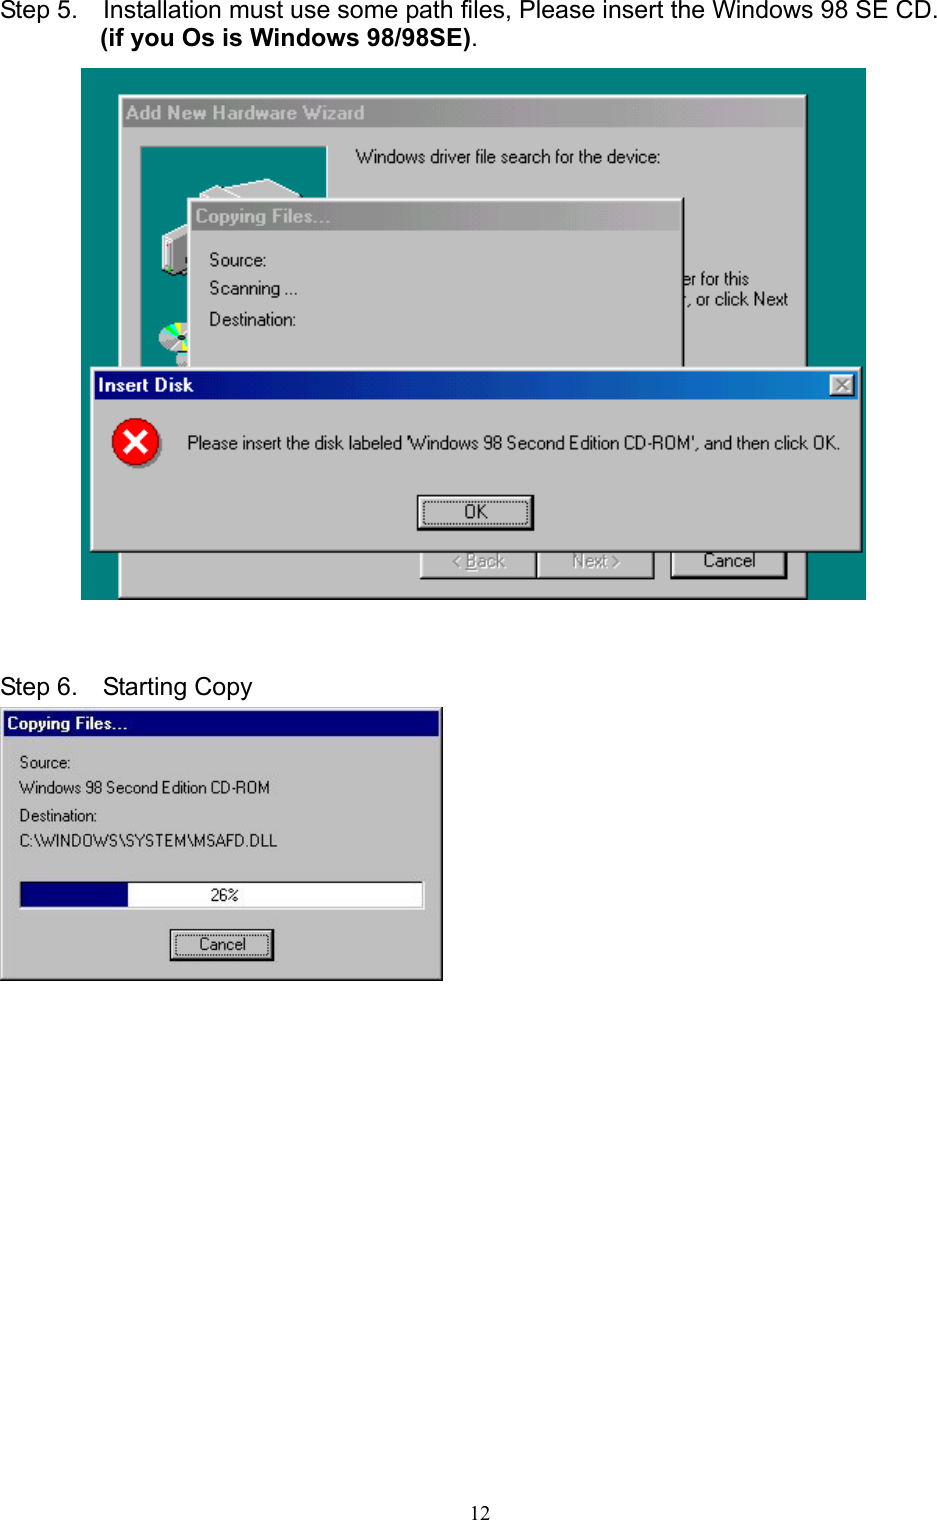   12 Step 5.    Installation must use some path files, Please insert the Windows 98 SE CD. (if you Os is Windows 98/98SE).    Step 6.  Starting Copy                  